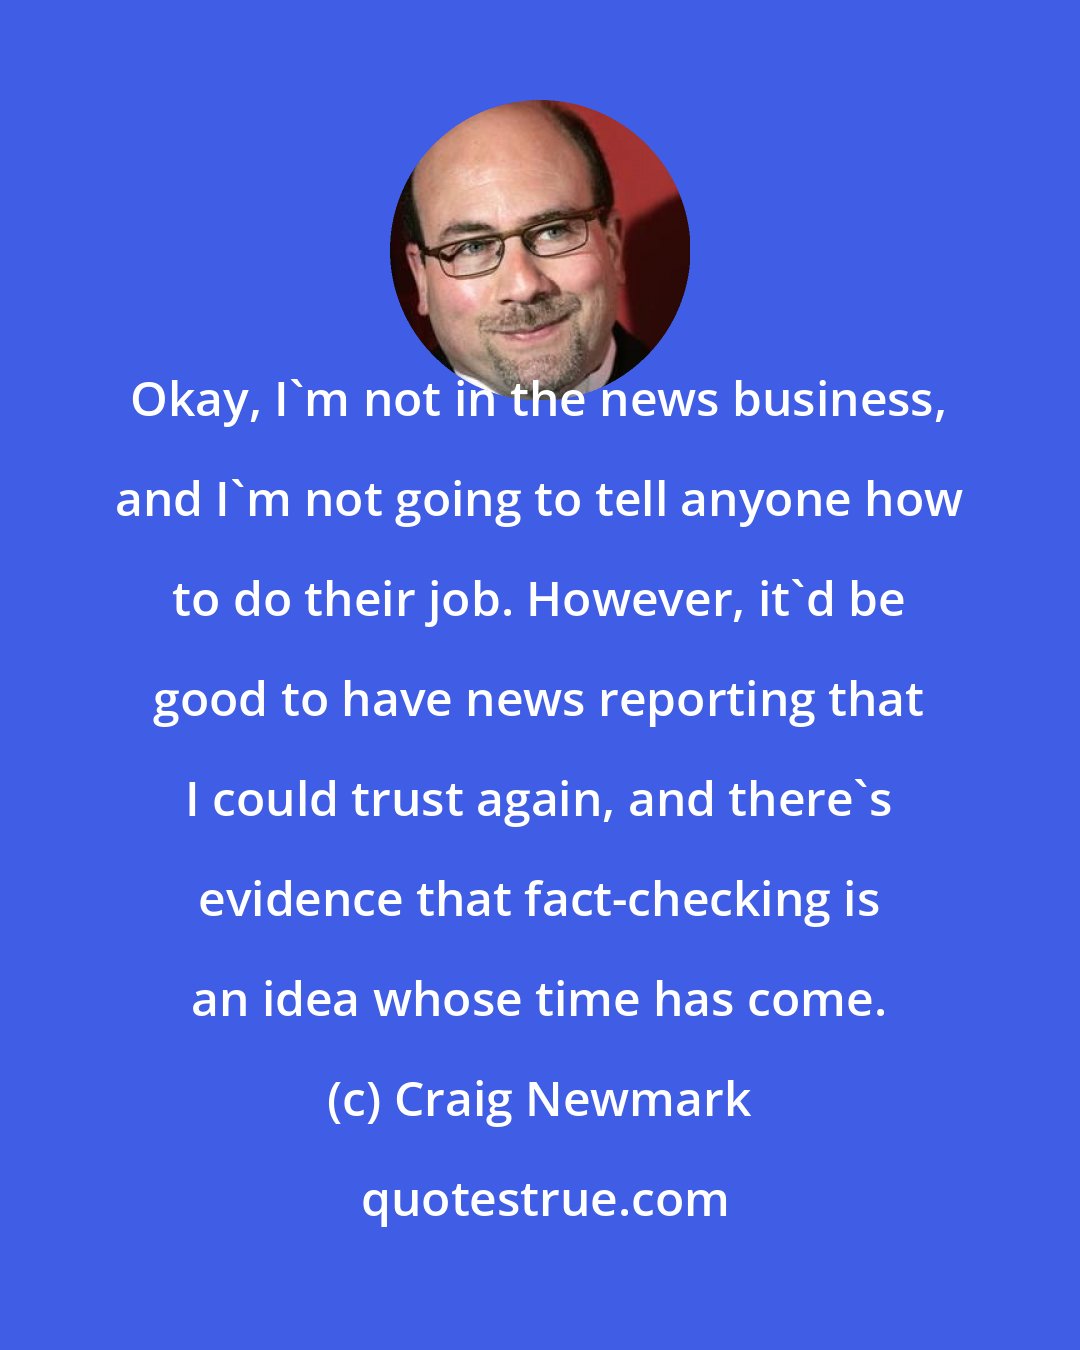 Craig Newmark: Okay, I'm not in the news business, and I'm not going to tell anyone how to do their job. However, it'd be good to have news reporting that I could trust again, and there's evidence that fact-checking is an idea whose time has come.